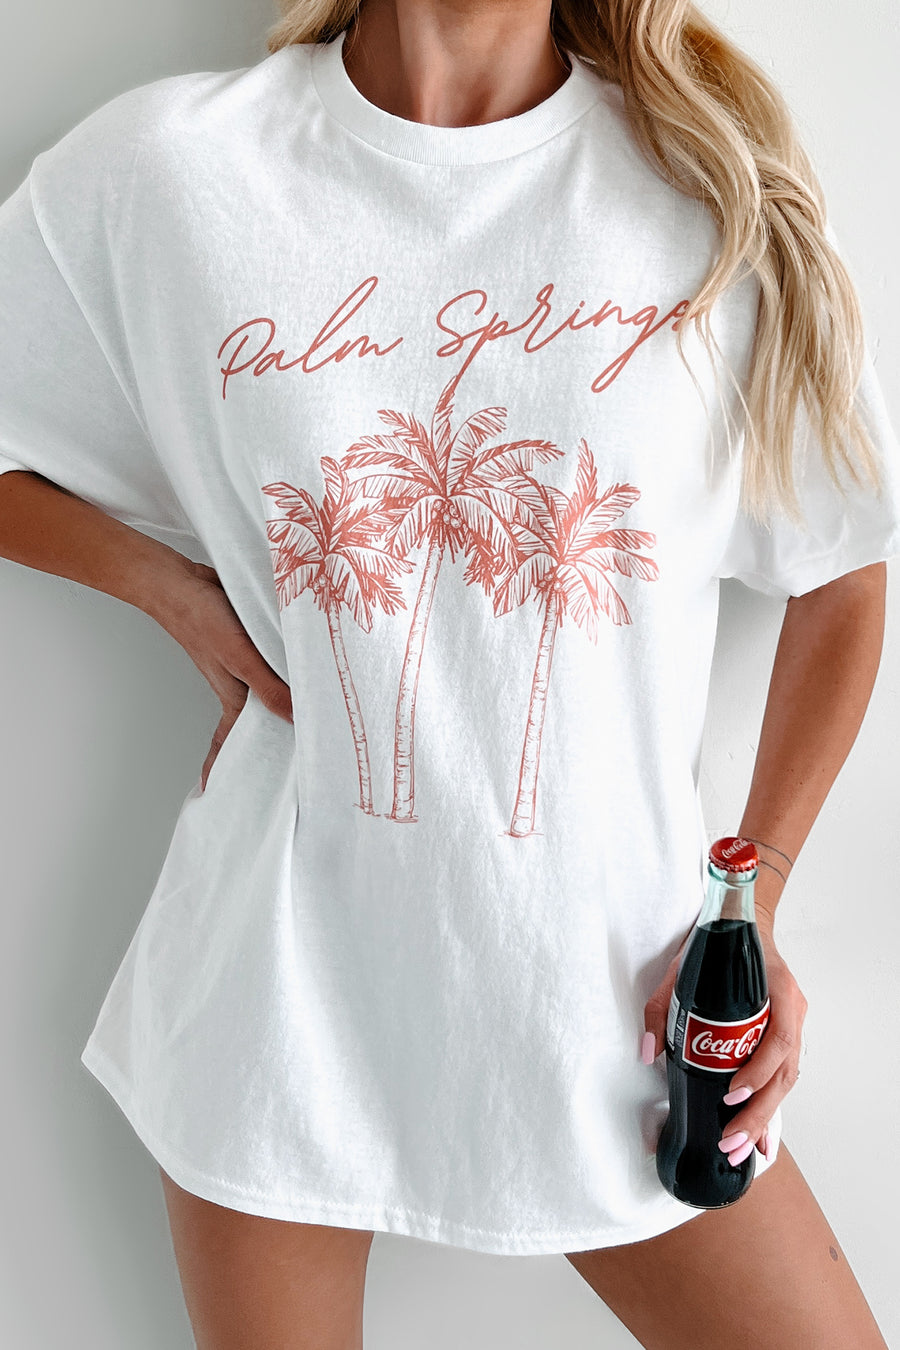 "Palm Springs" Graphic T-Shirt (White)